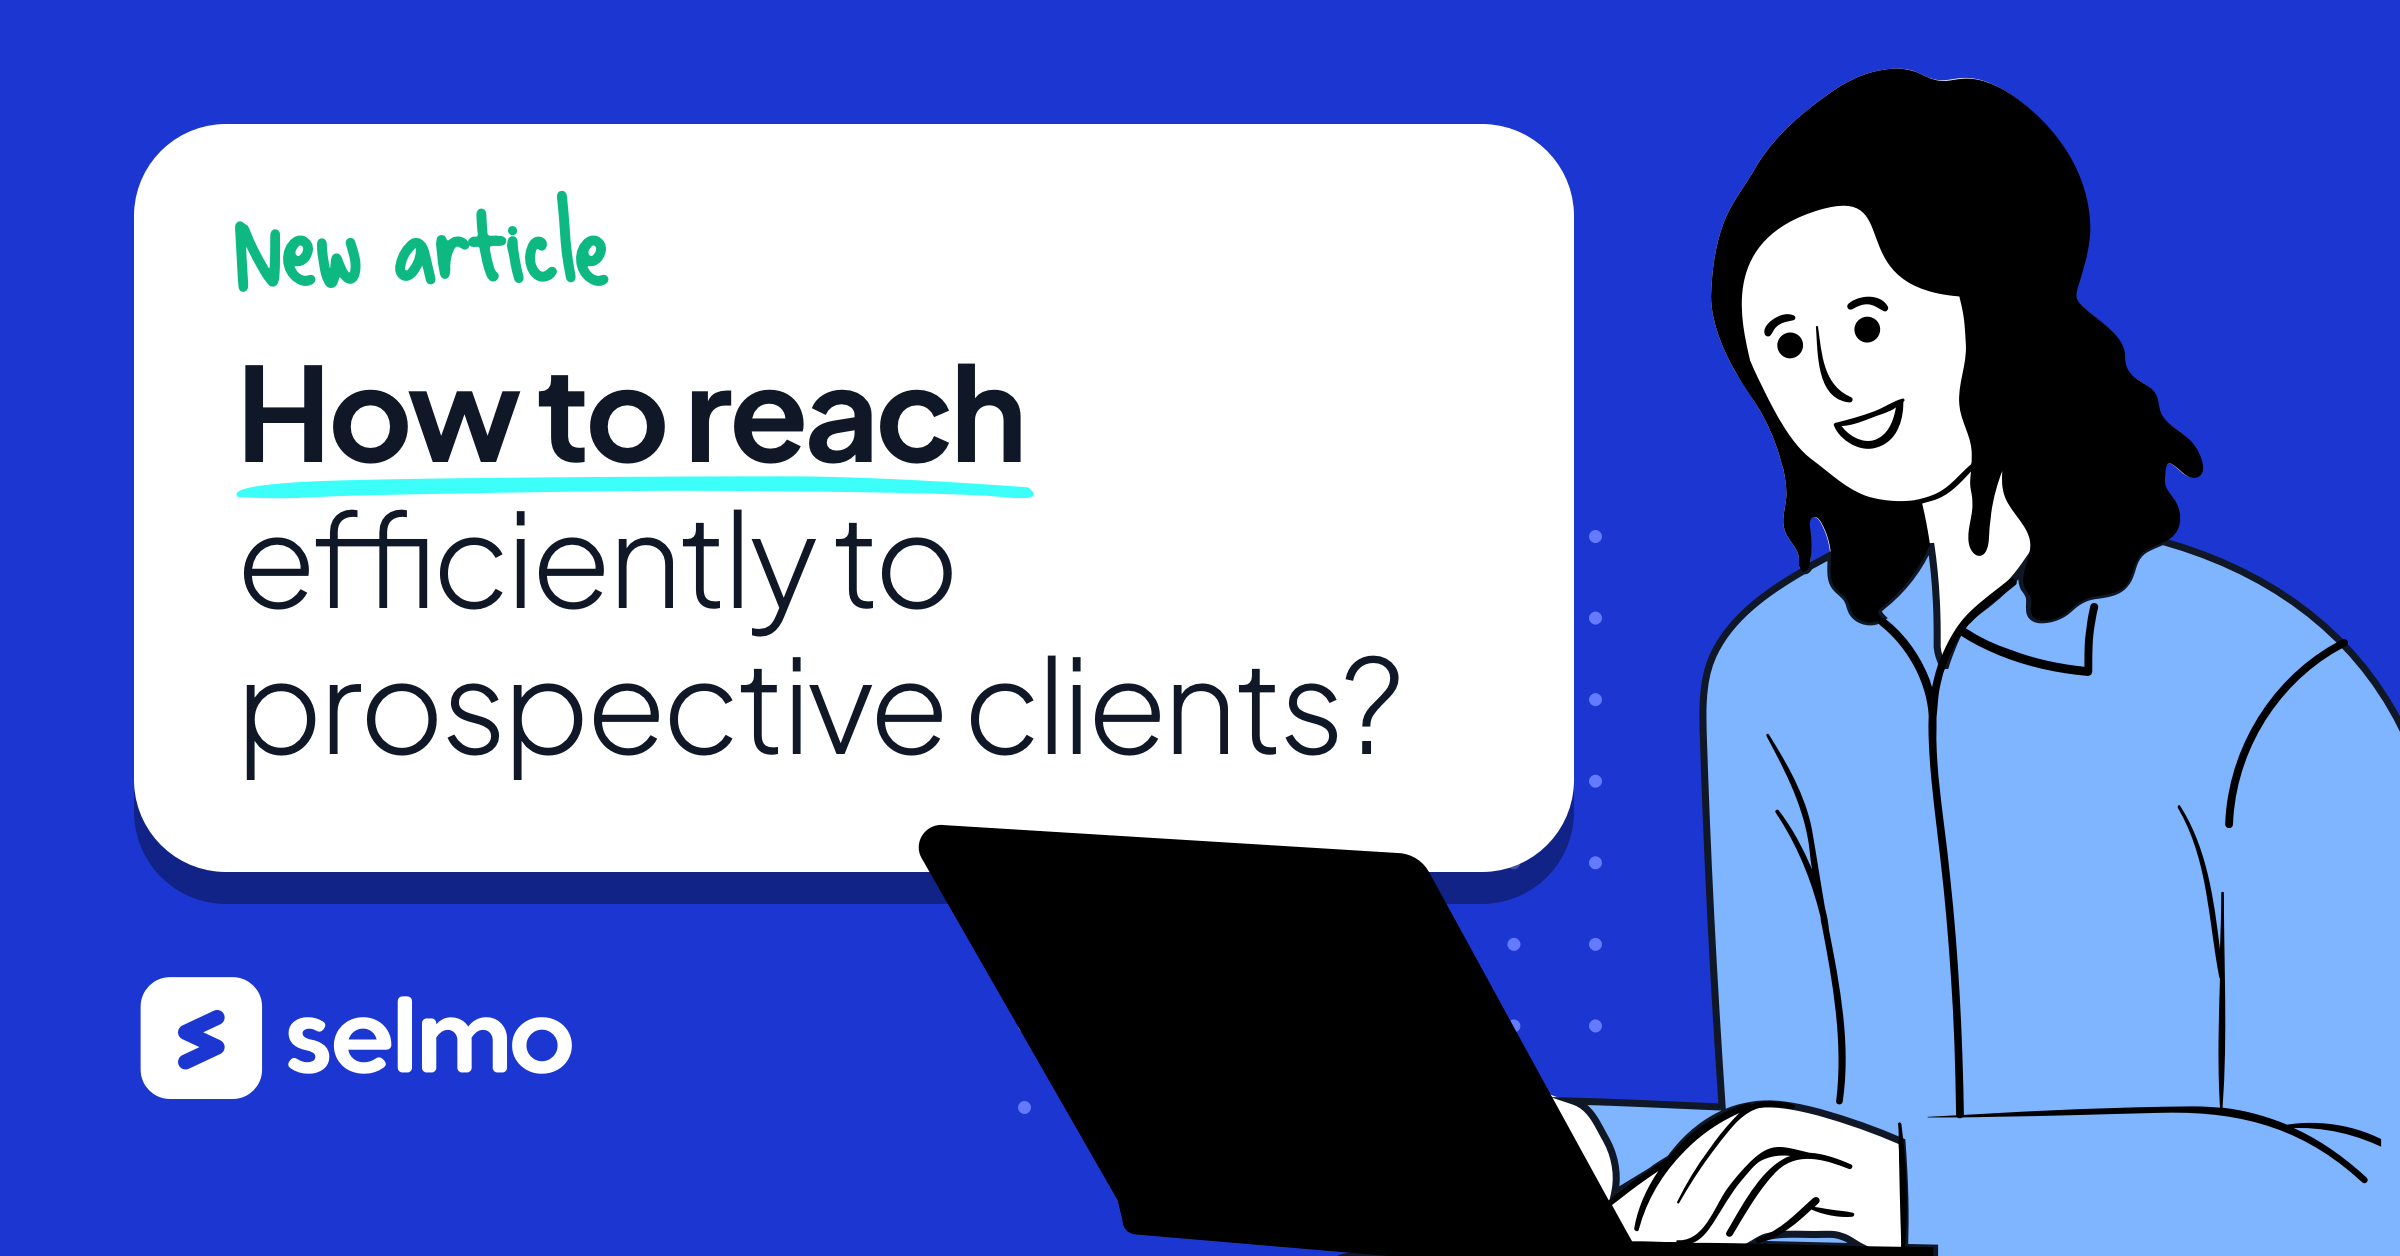 How to reach efficiently to prospective clients?